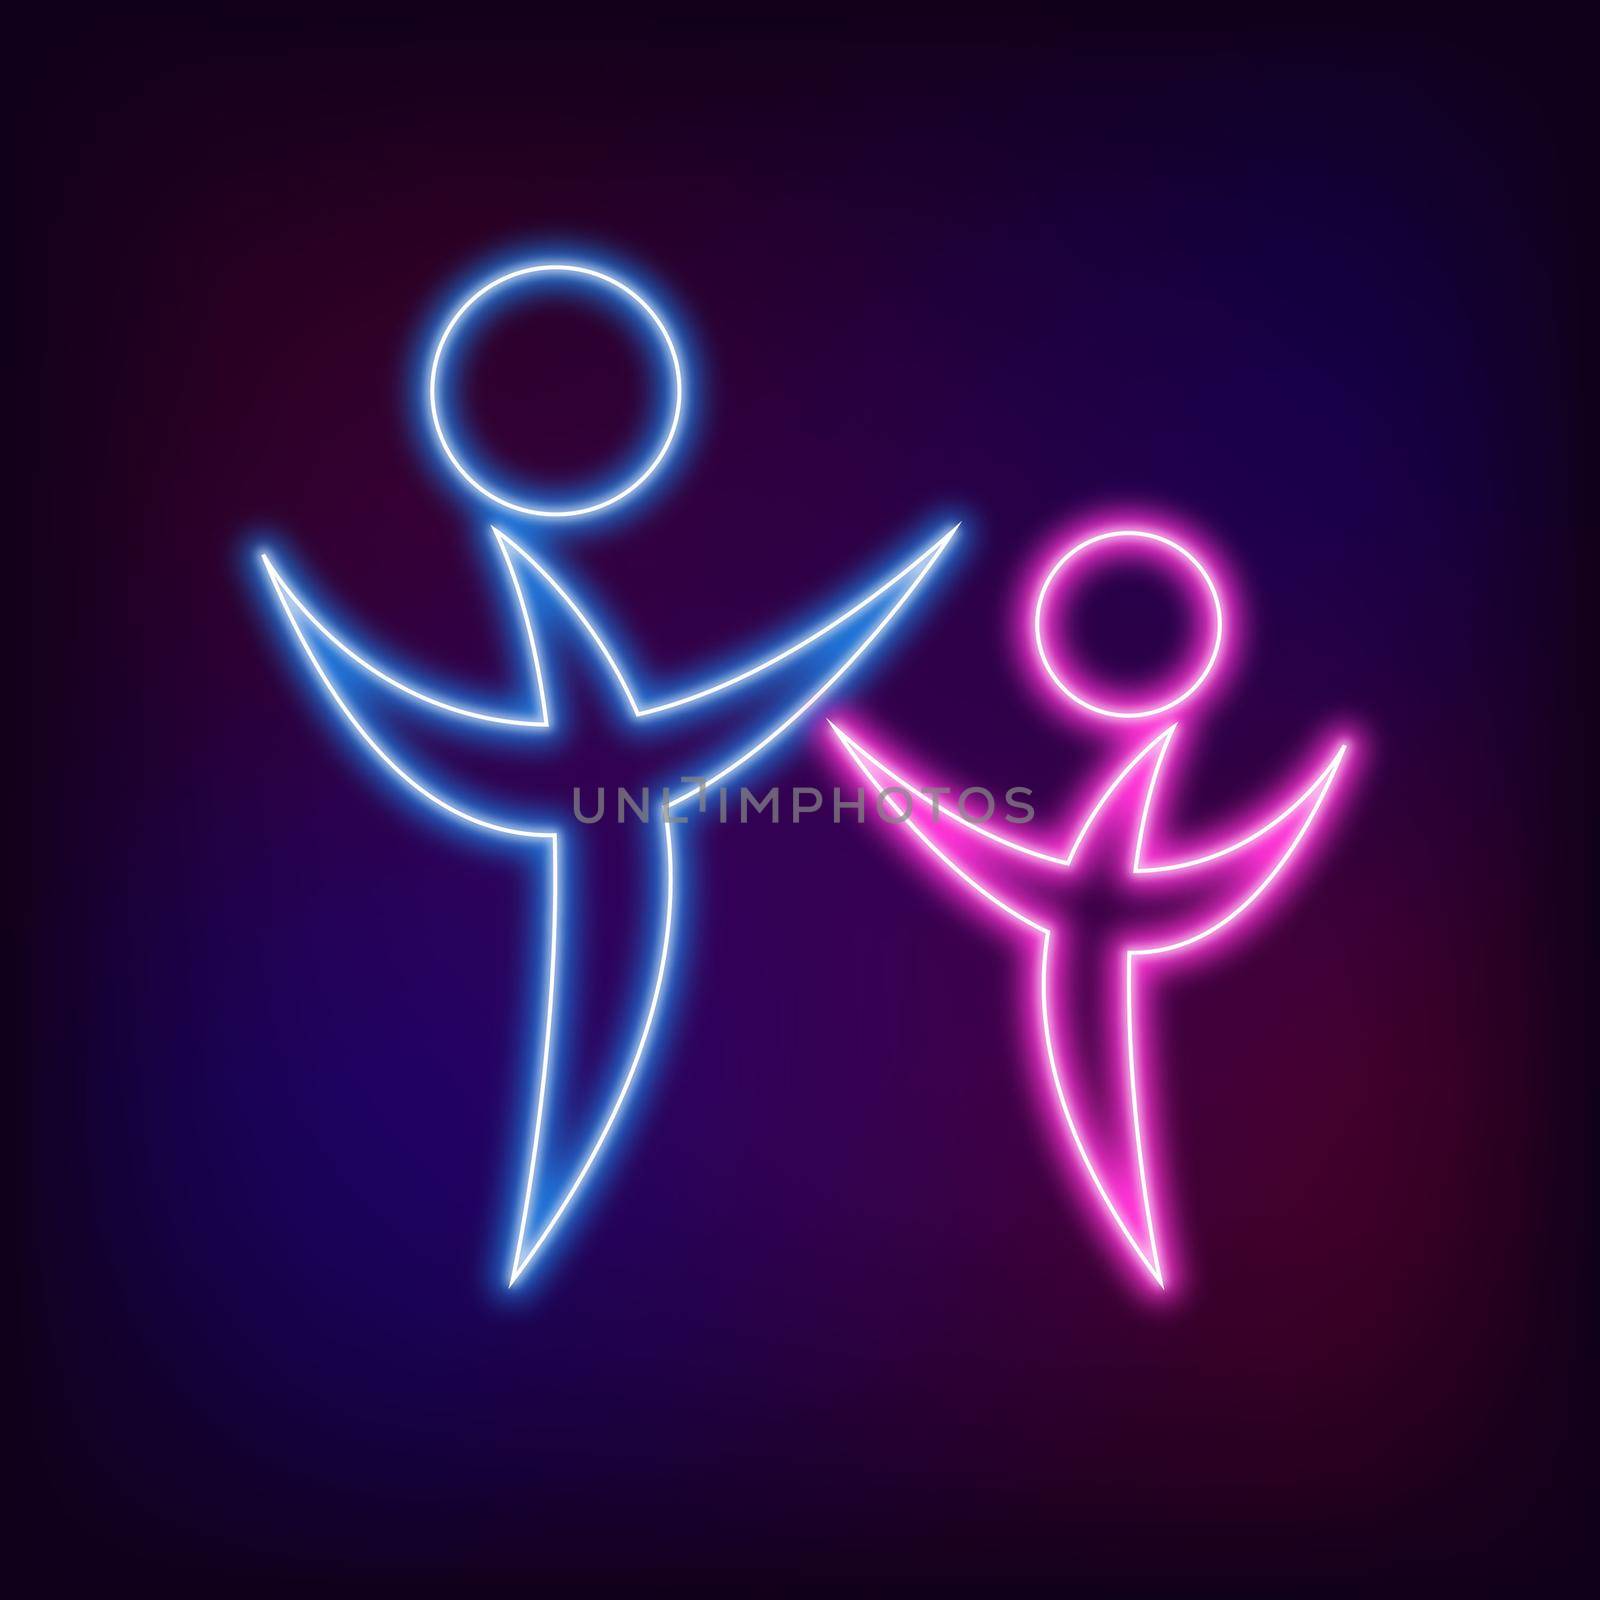 Modern Neon logo people psi Sign of Psychology. Family Human. Creative style. Icon in . Design concept. Brand company. violet blue color isolated on blur background. Symbol for web, print, logotype.